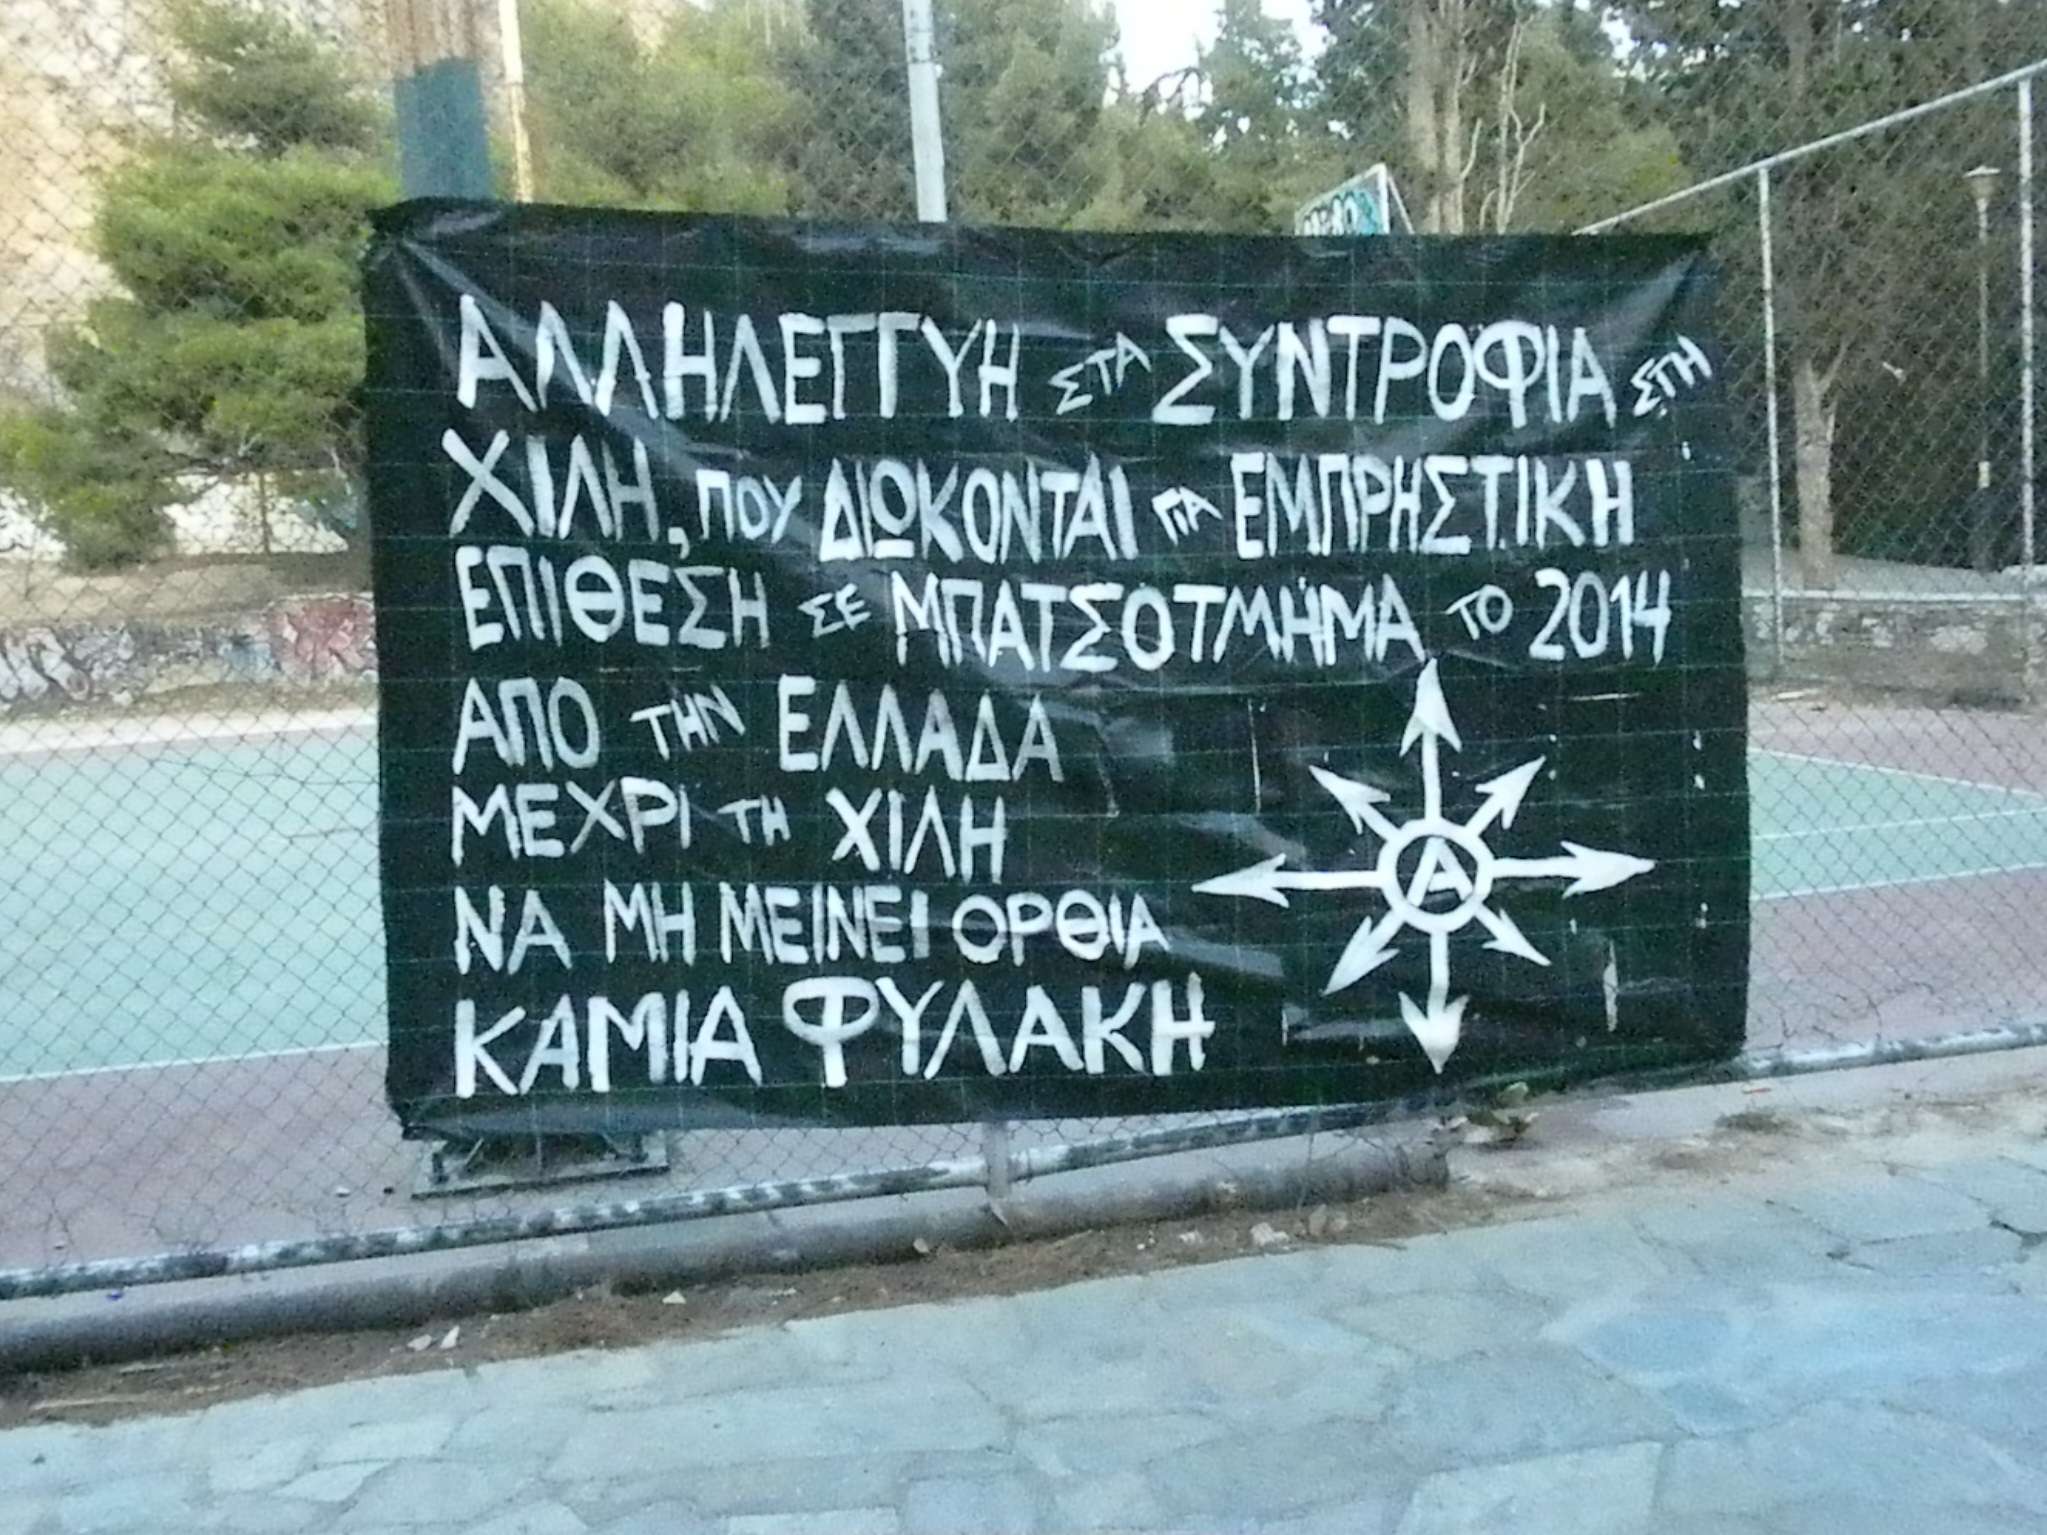 Greece: Gesture of solidarity with the comrades in Chile, that are prosecuted for the PDI case [Contribution to the international solidarity call for 16-21 of October]